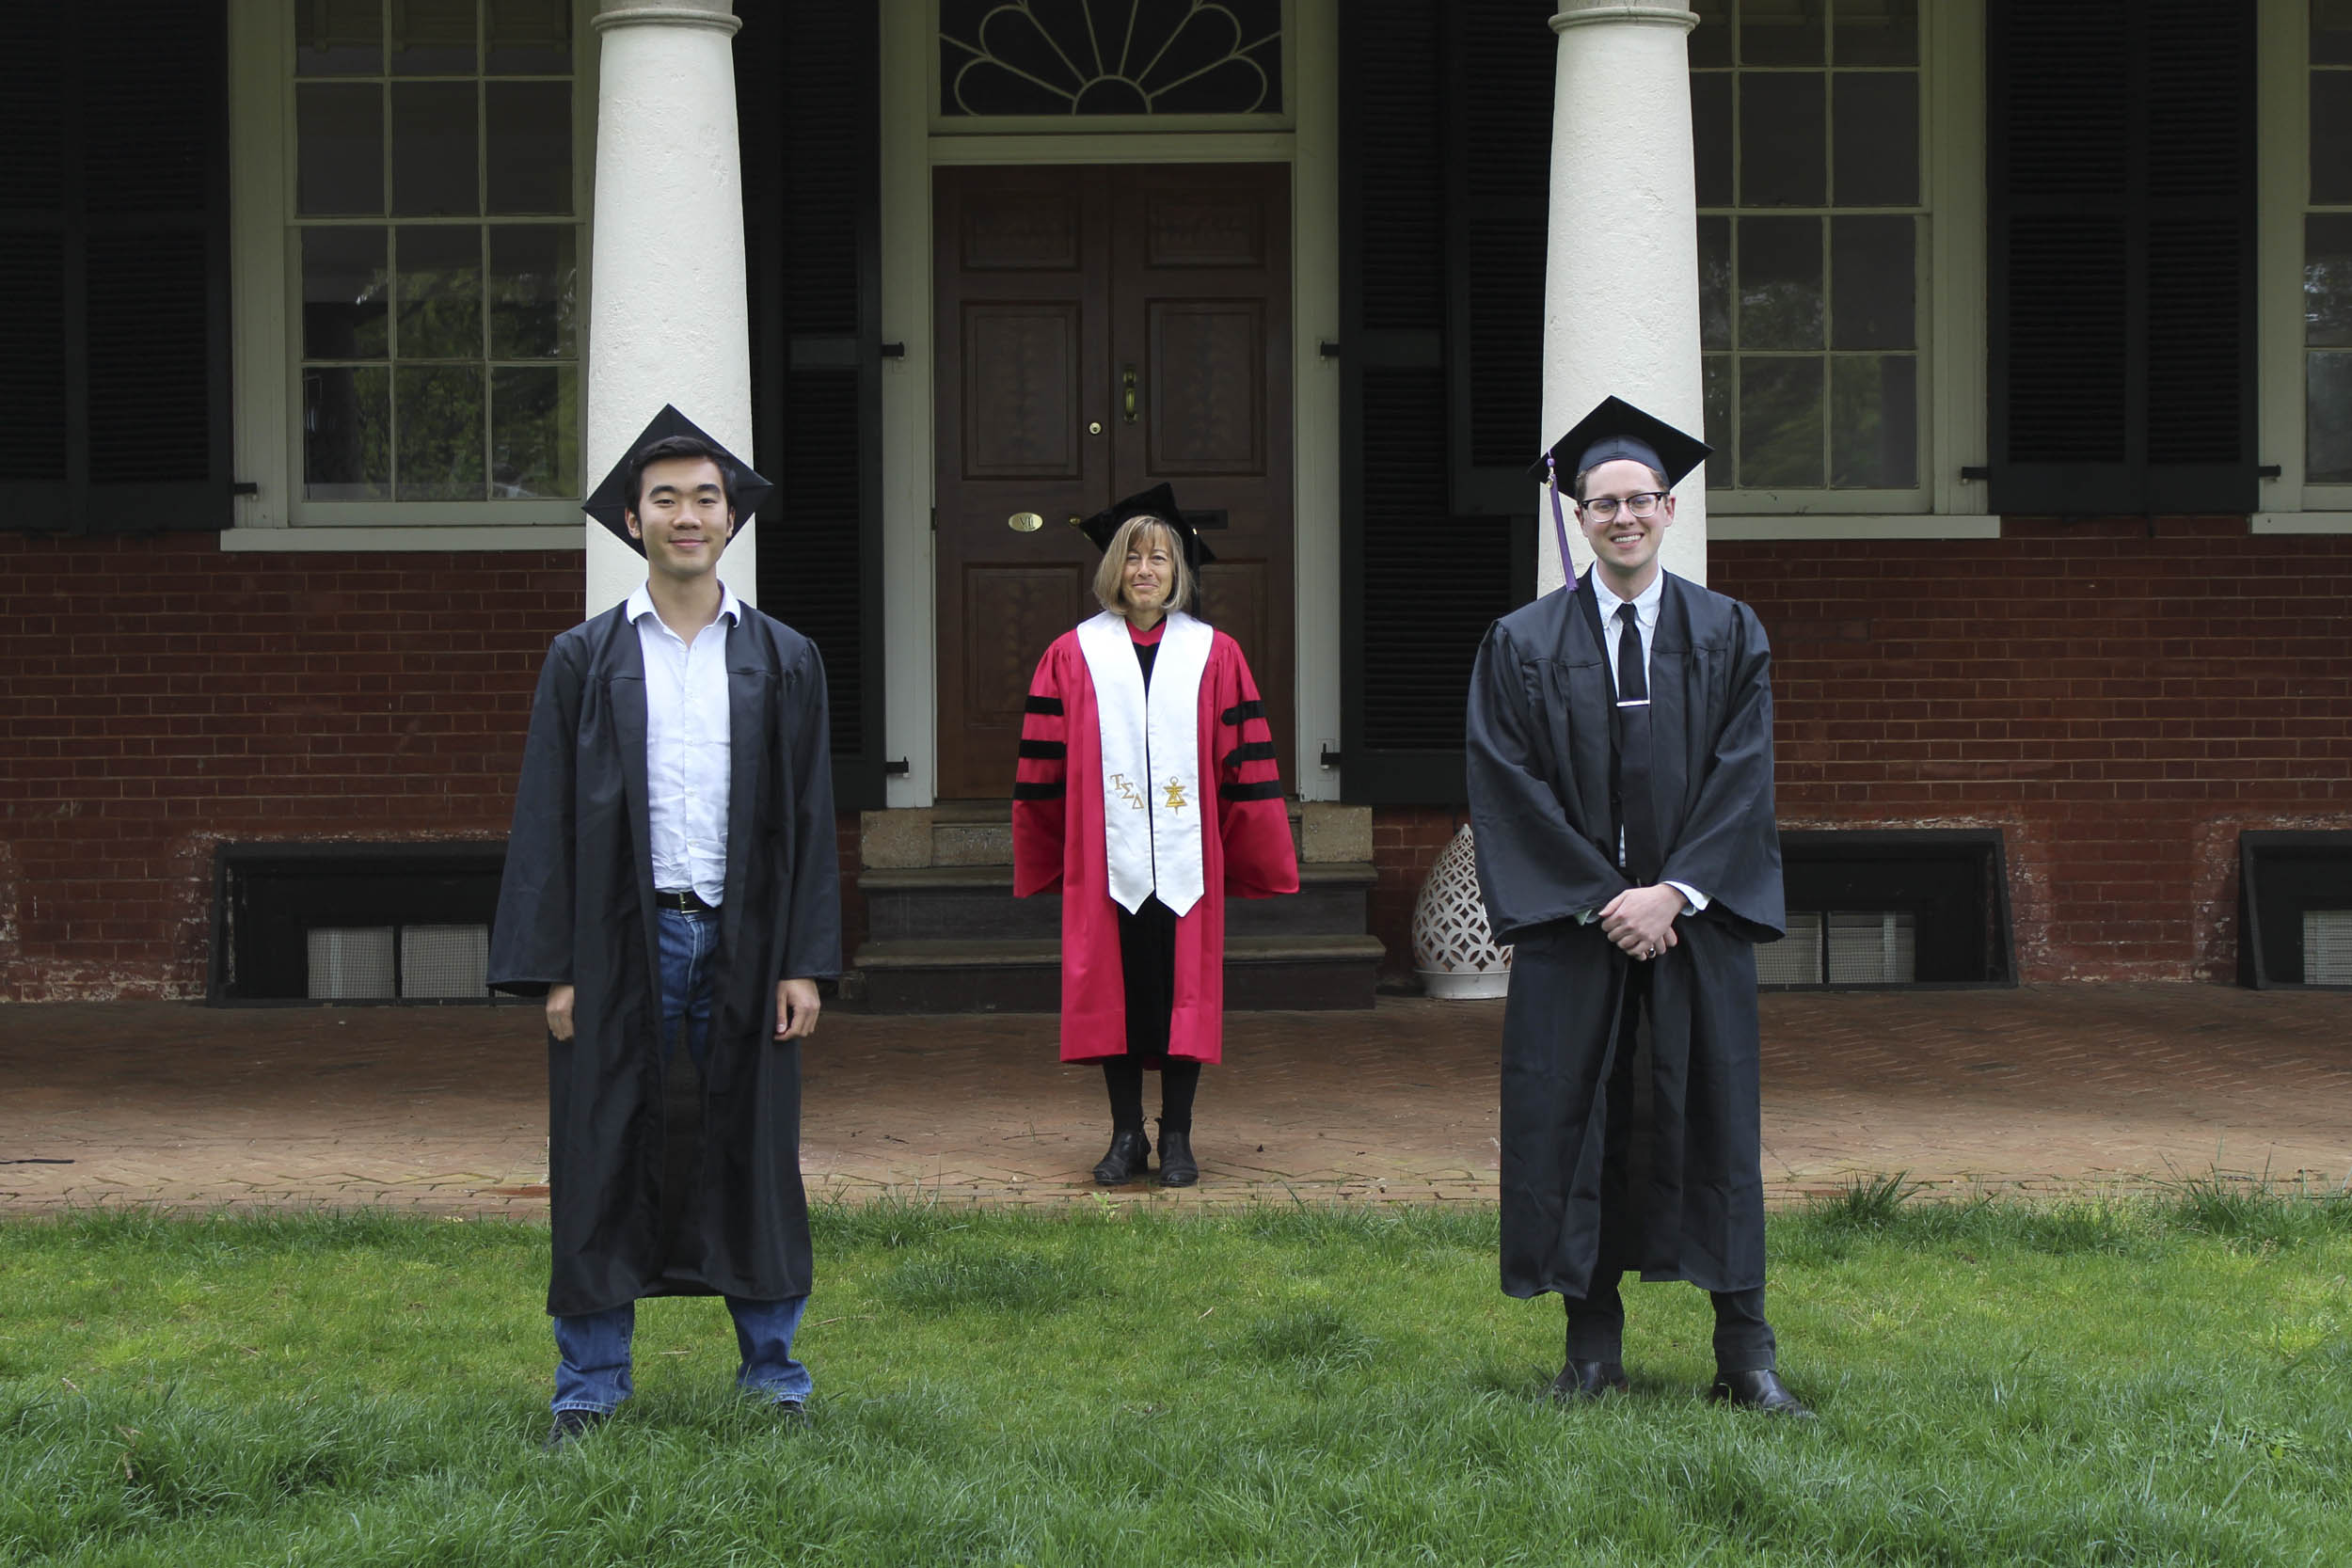 Winston Tang stands socially distanced with two other people on the Lawn all dressed in their graduation hat and gowns